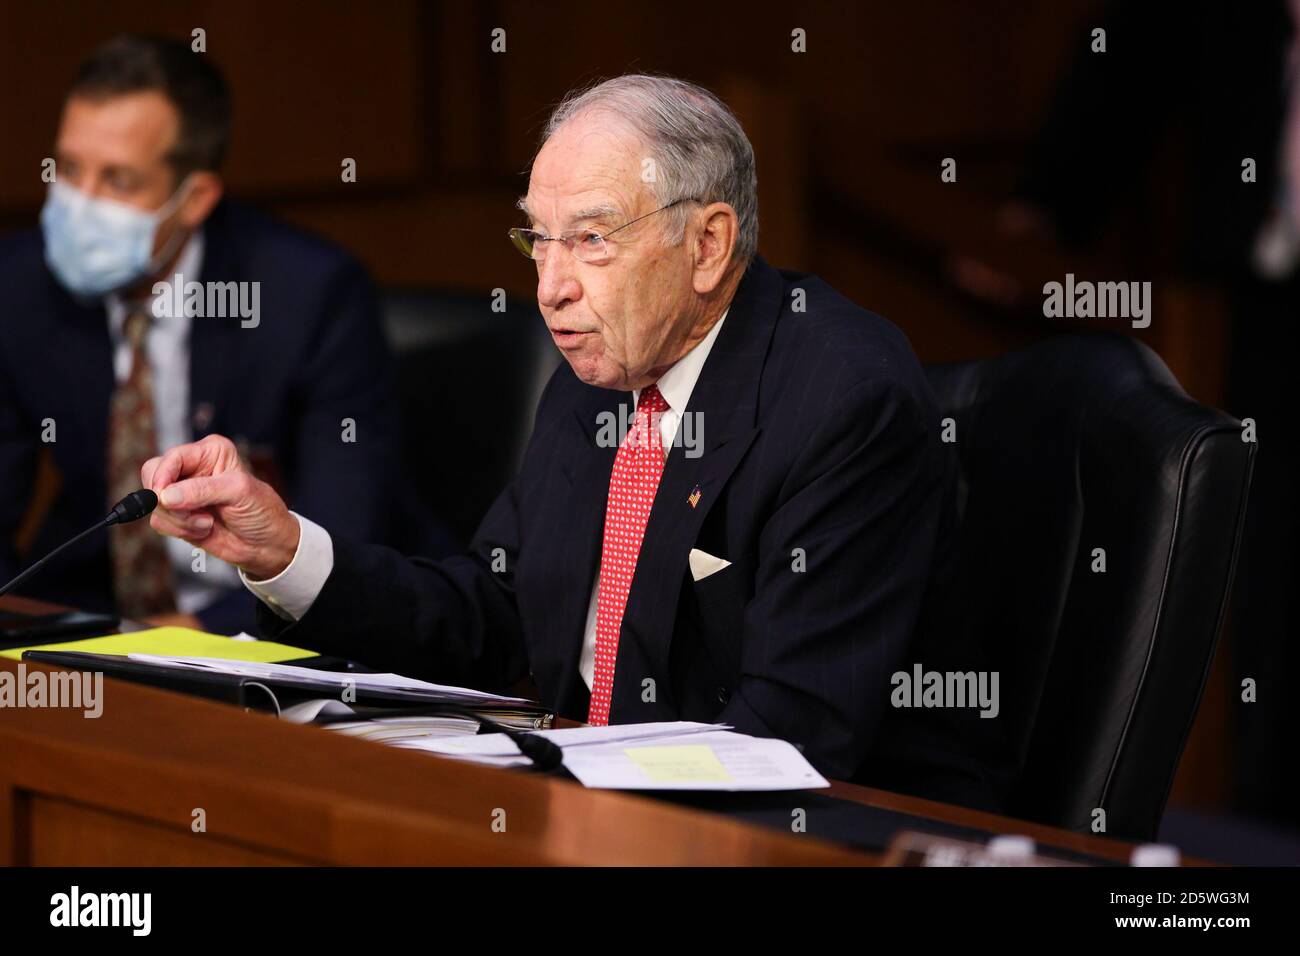 Washington, Dc, USA. 14th Oct, 2020. Sen. Chuck Grassley (R-Iowa) questions President Donald Trump's Supreme Court nominee Judge Amy Coney Barrett during the third day of her Senate Judiciary Committee confirmation hearing Wednesday, October 14, 2020. (Photo by Bonnie Cash/Pool/Sipa USA) Credit: Sipa USA/Alamy Live News Stock Photo